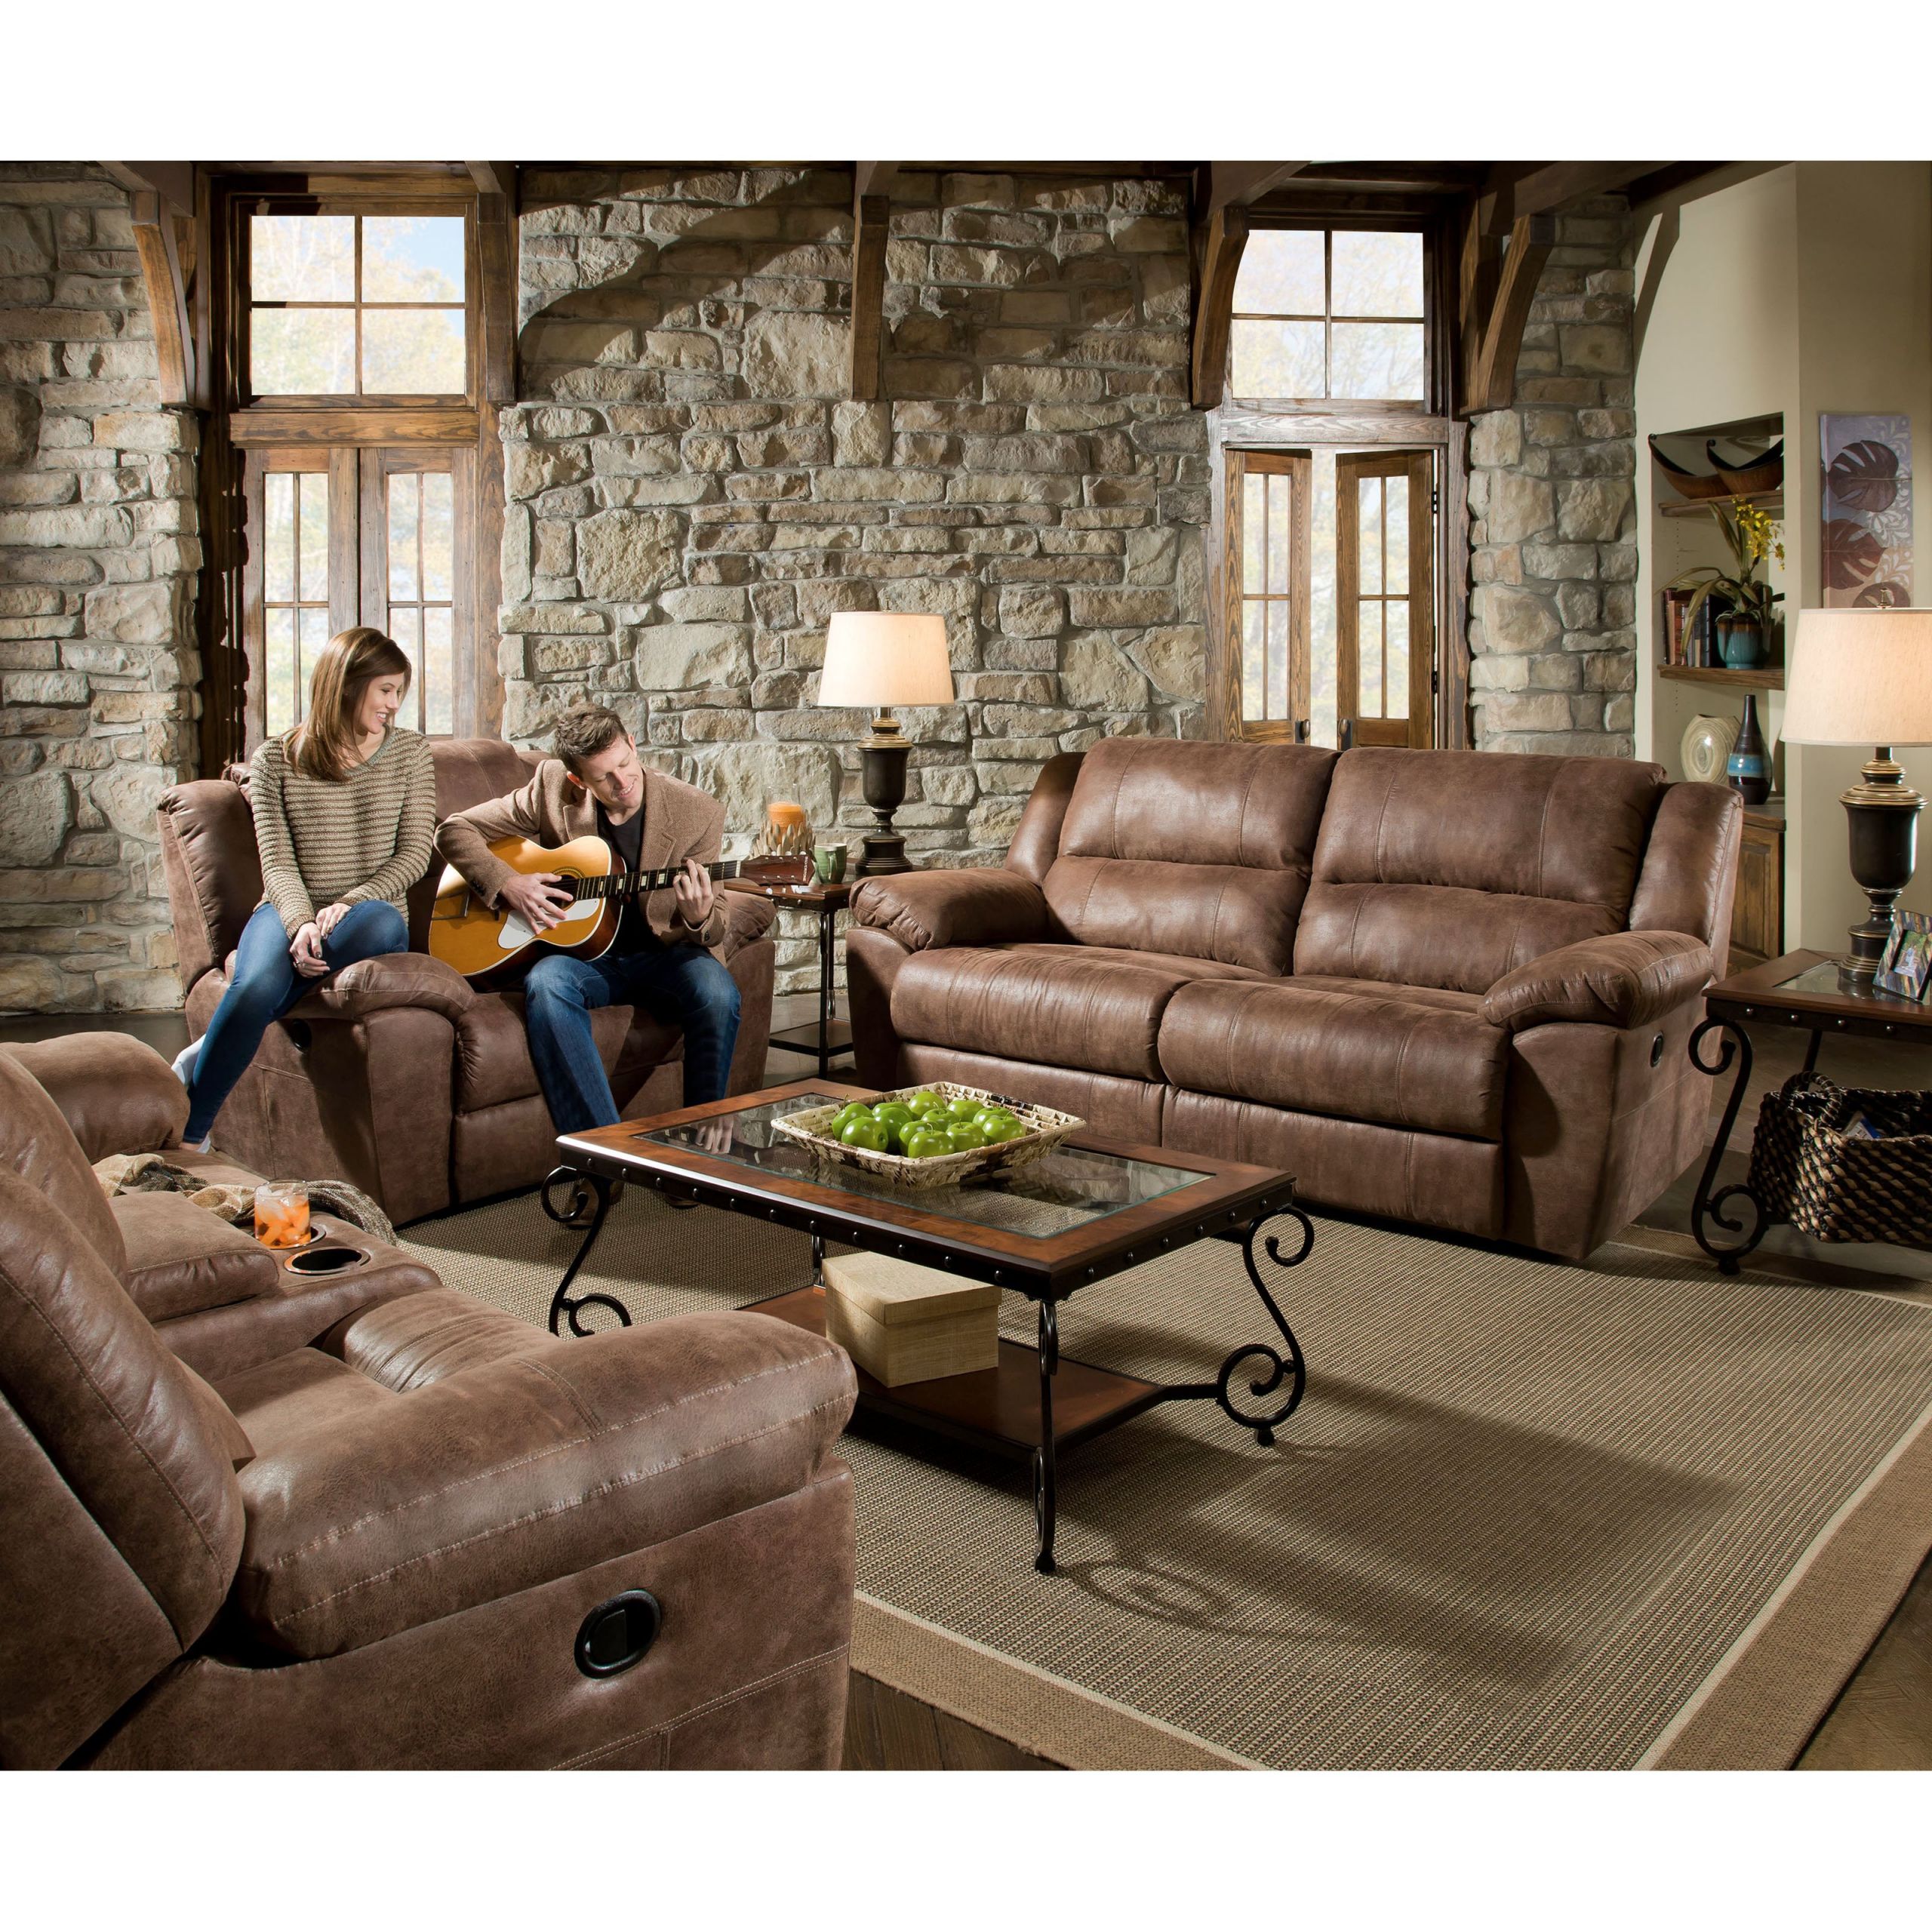 Rustic Living Room Sets
 Furniture Padded Angle Arm And Fully Padded Chaise With